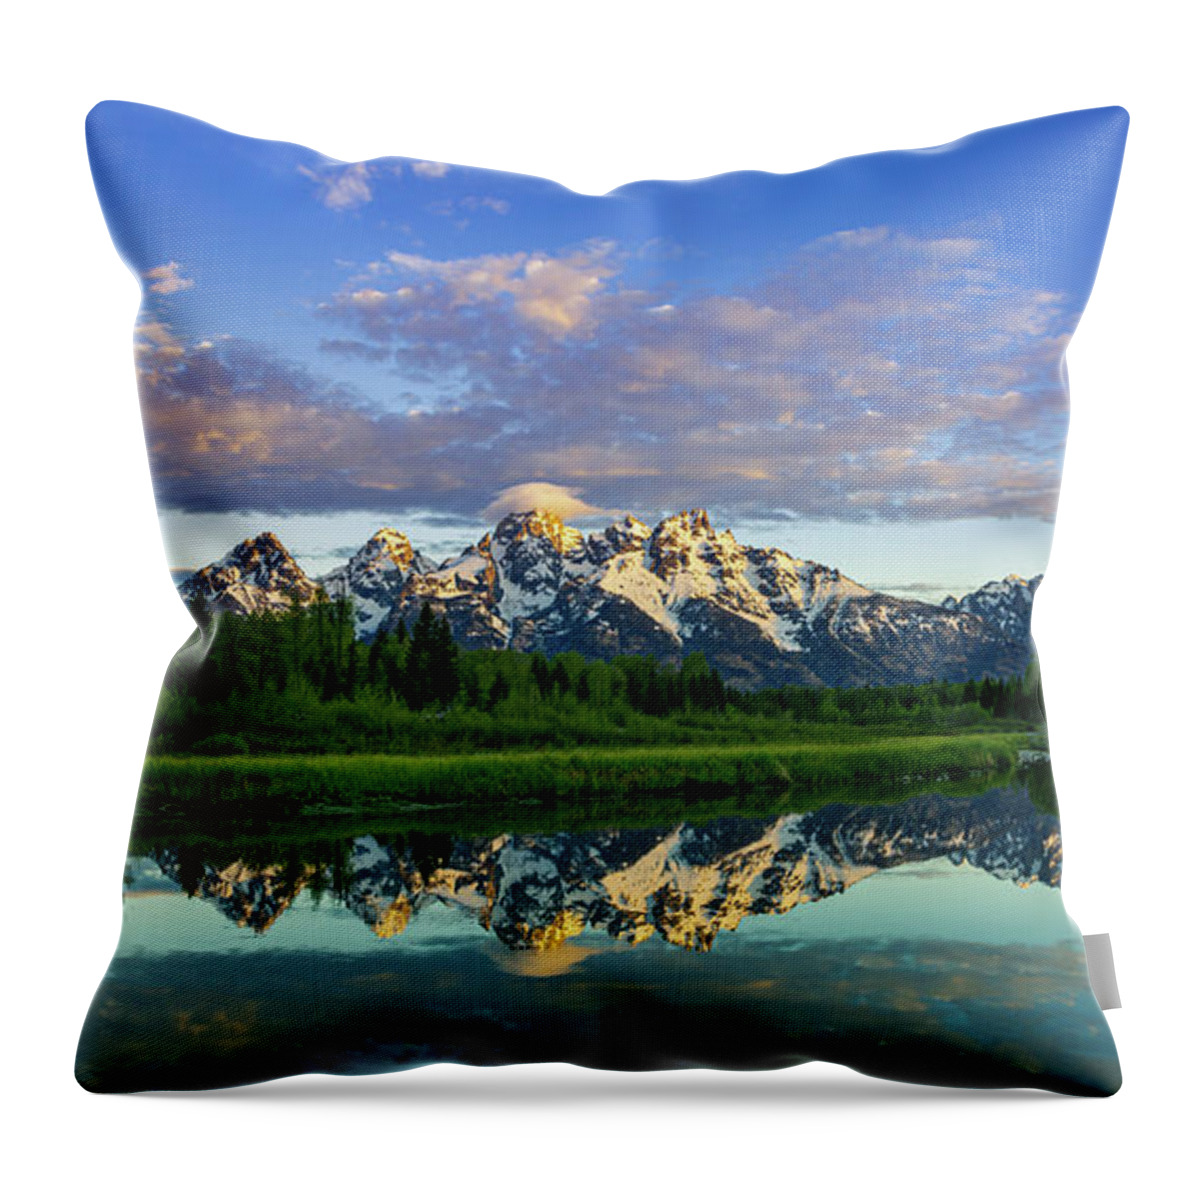 Mountains Throw Pillow featuring the photograph Schwabacher's Landing by David Lee